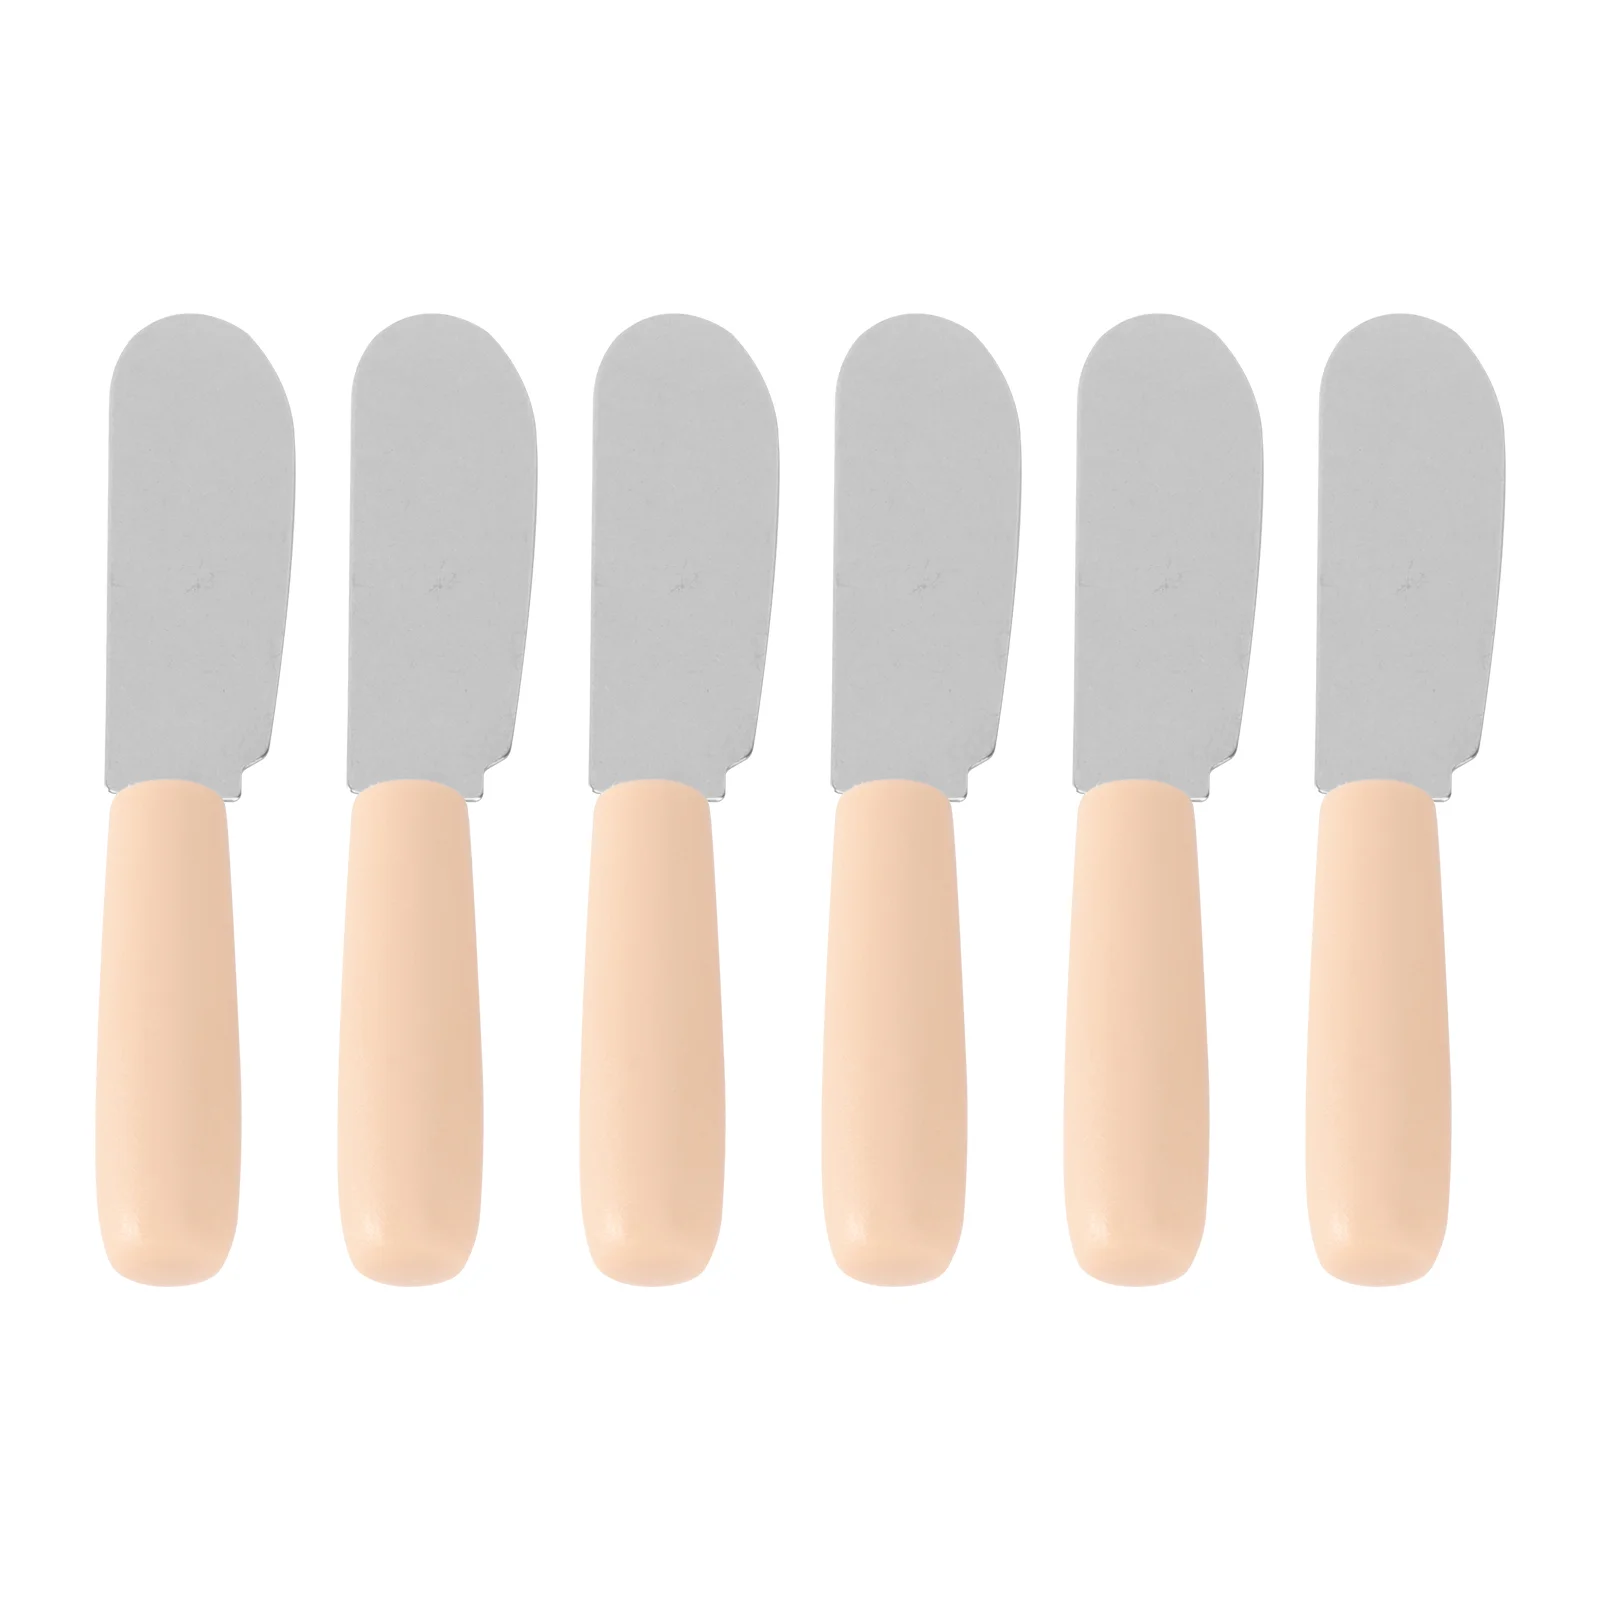 

6 Pcs Cooking Spatula Cheese Spreader Stainless Butter Breakfast Sandwiches Baking Wood Cream Metal Joycon Jelly